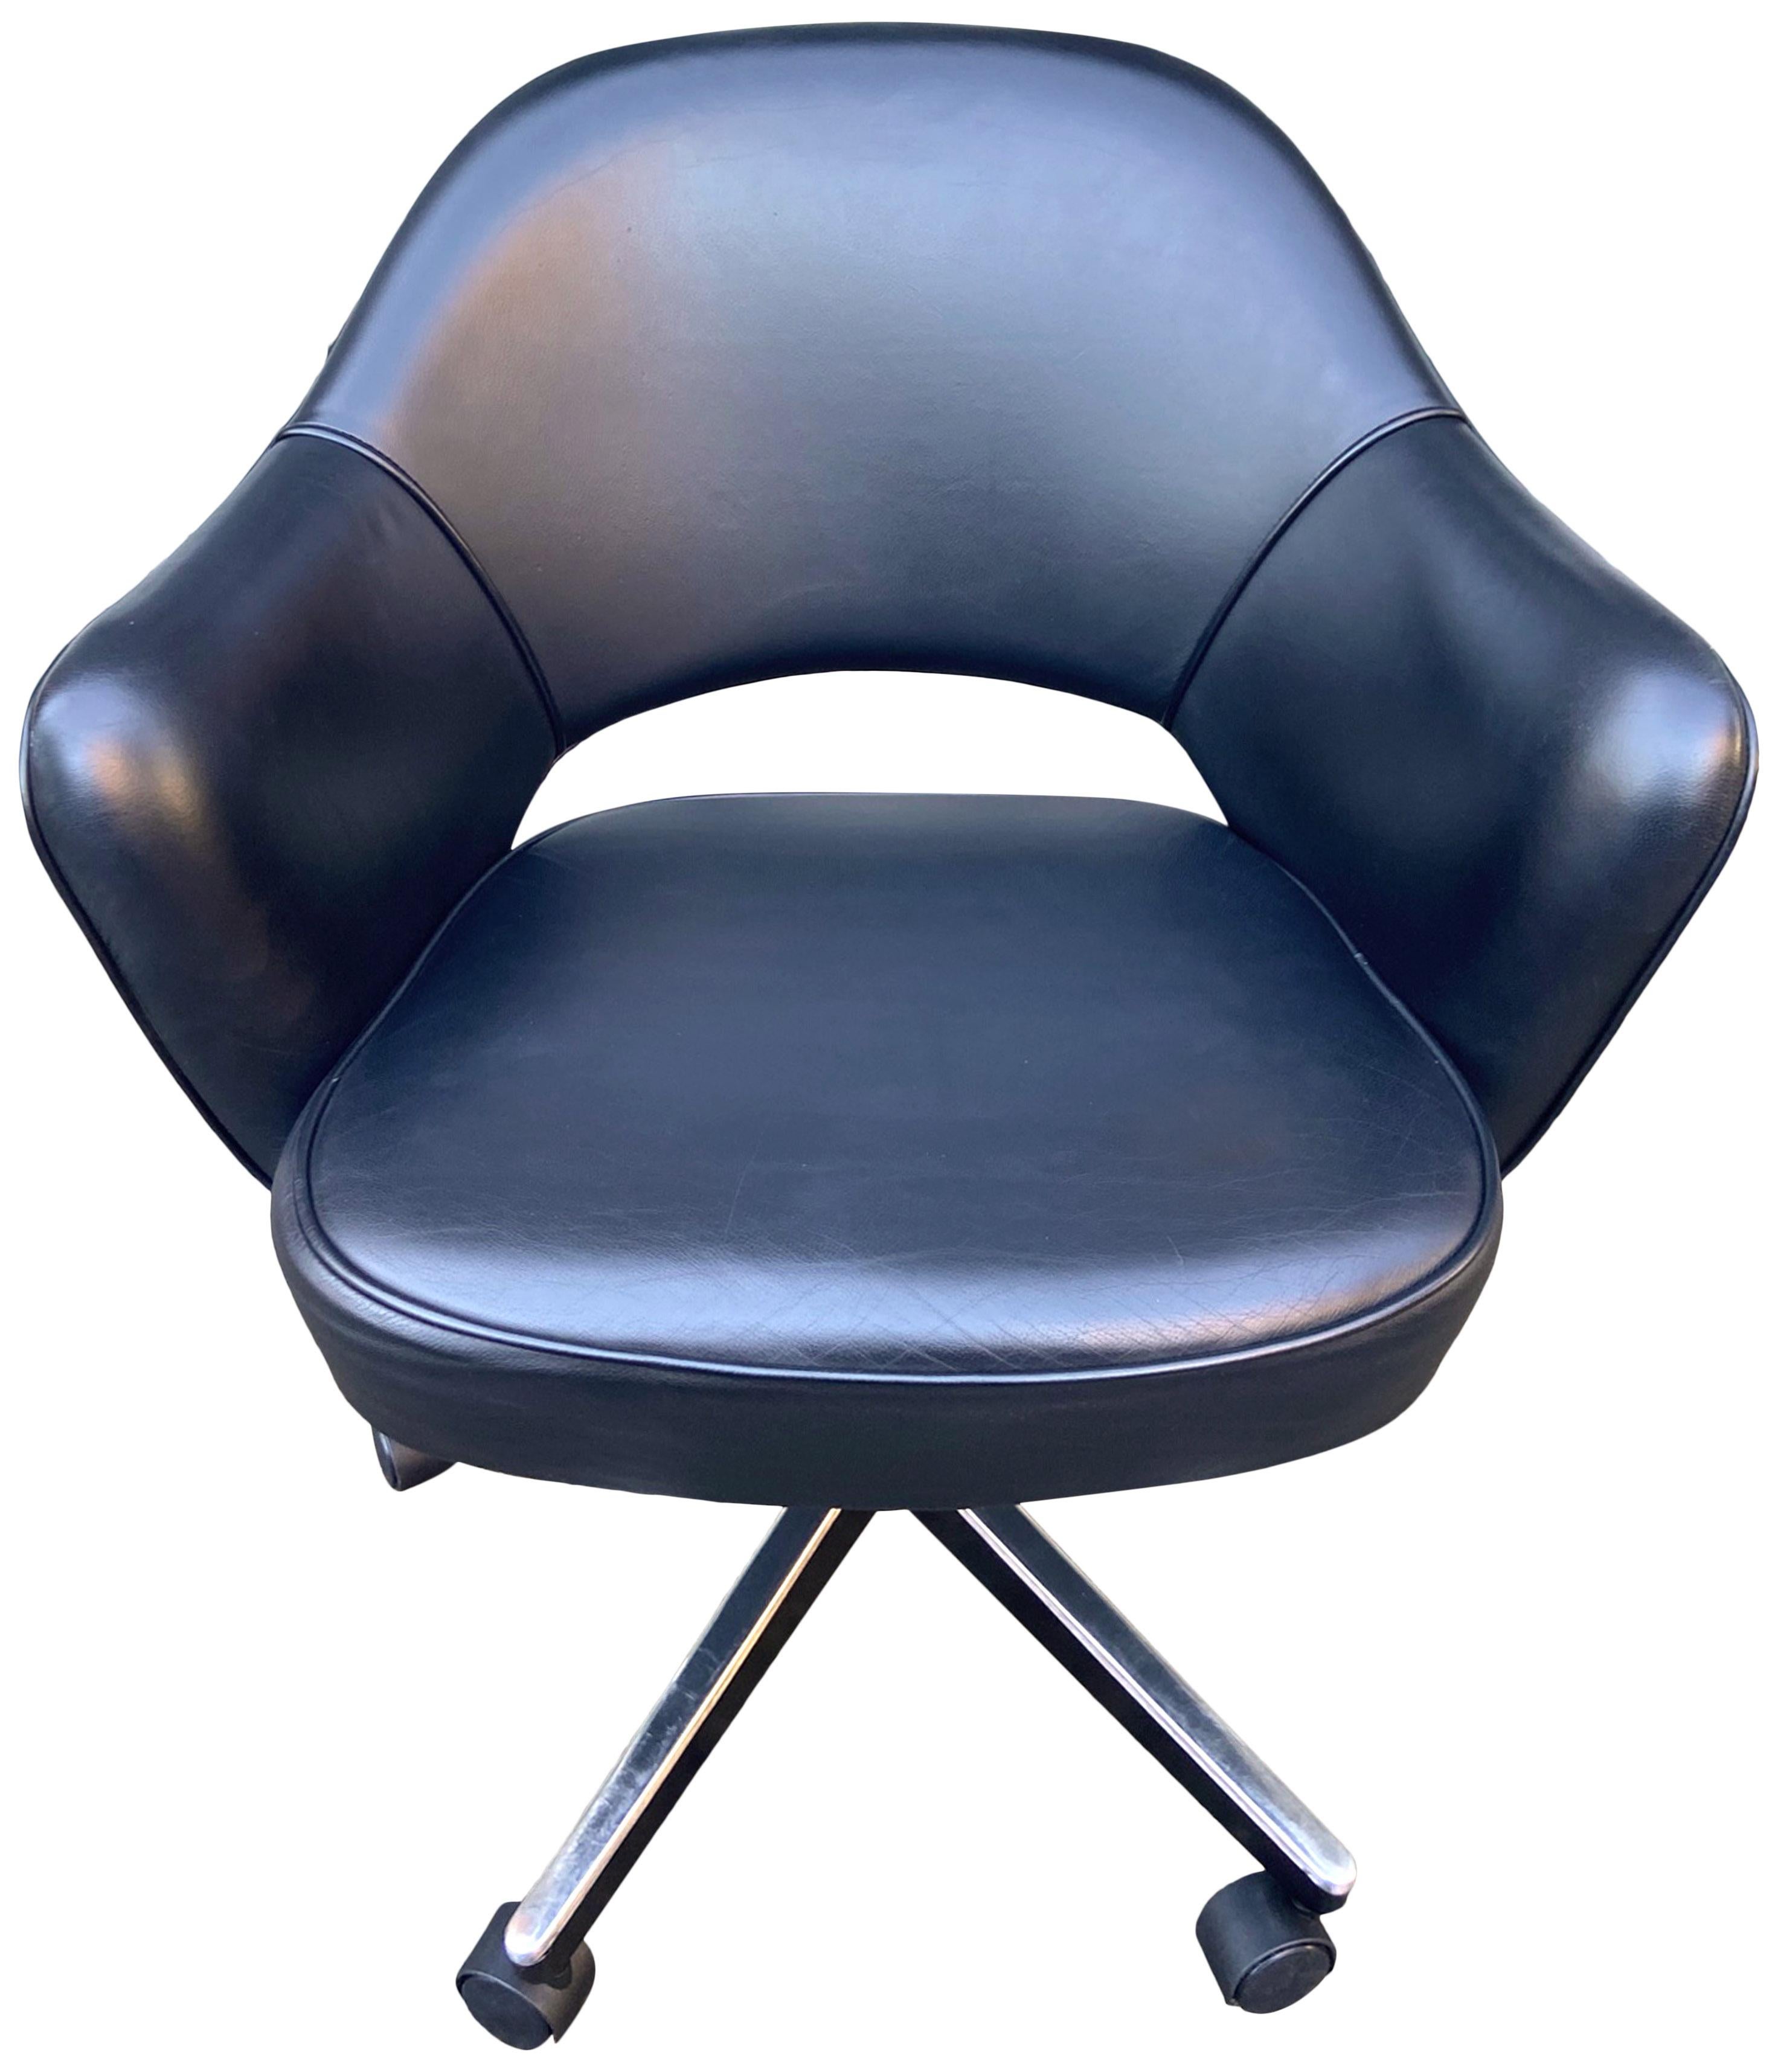 American Midcentury Saarinen Executive Chairs for Knoll